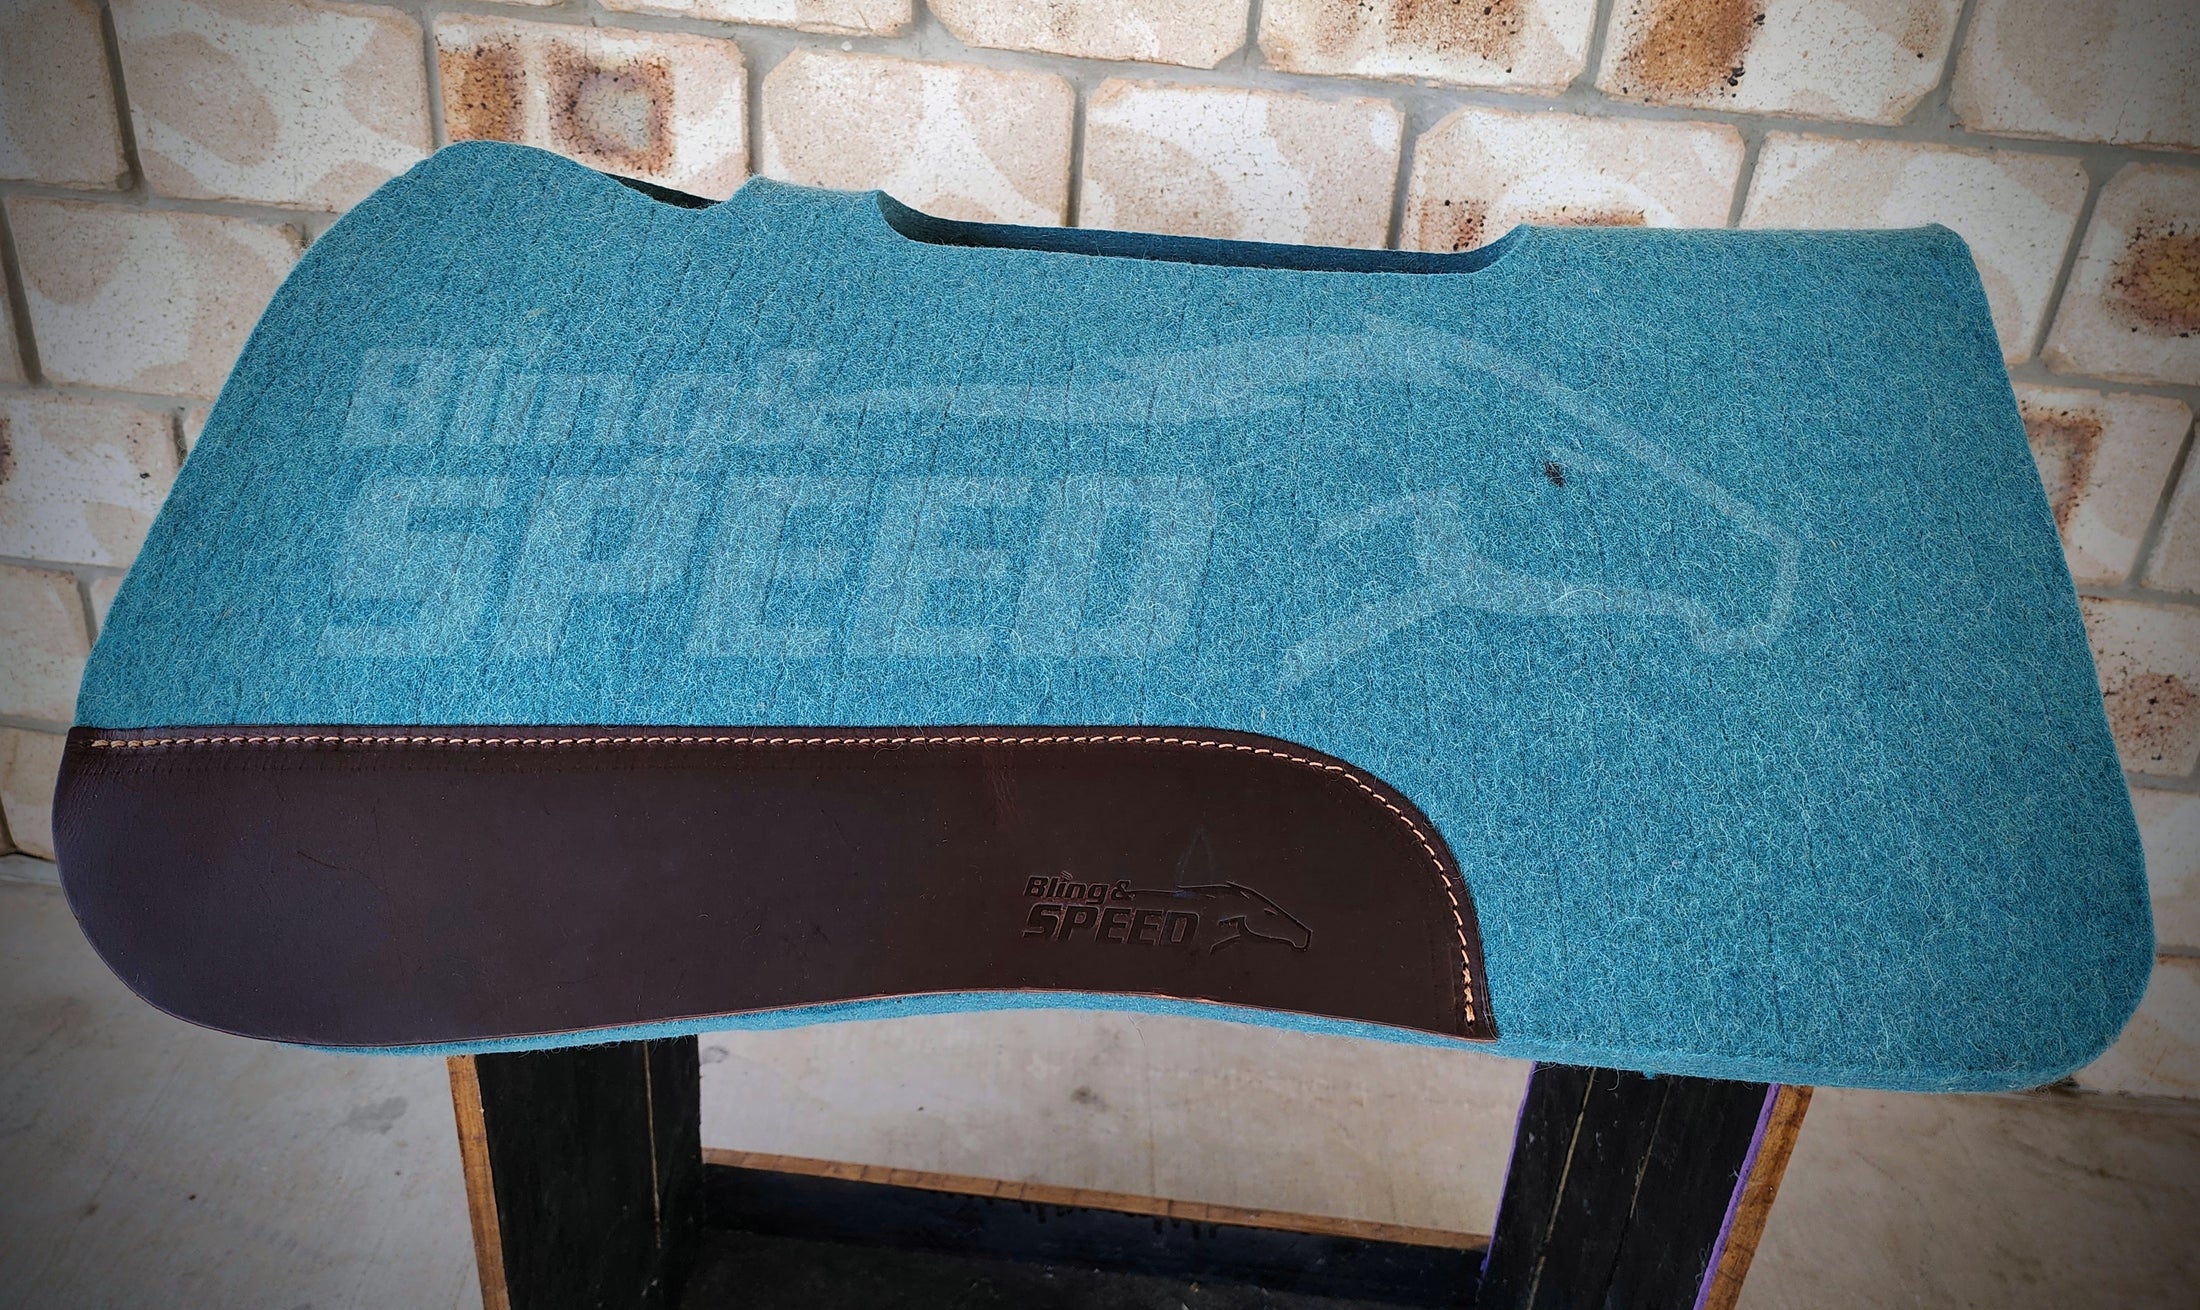 Wither and Spine Relief Felt Saddle Pad - Turquoise (7907541025006)